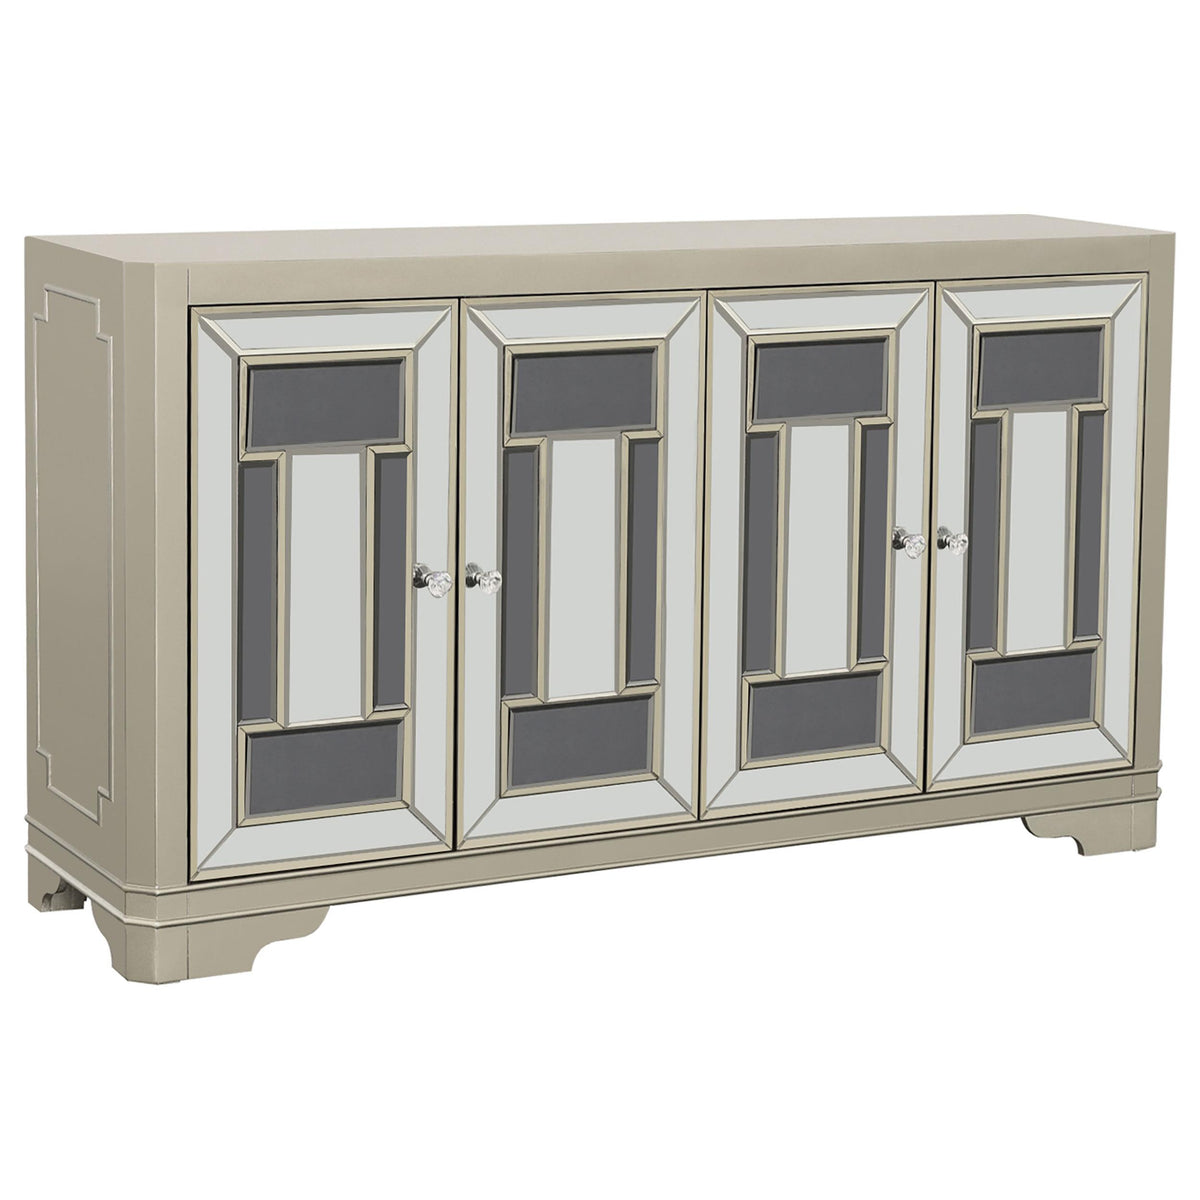 Toula 4-door Accent Cabinet Smoke and Champagne Toula 4-door Accent Cabinet Smoke and Champagne Half Price Furniture